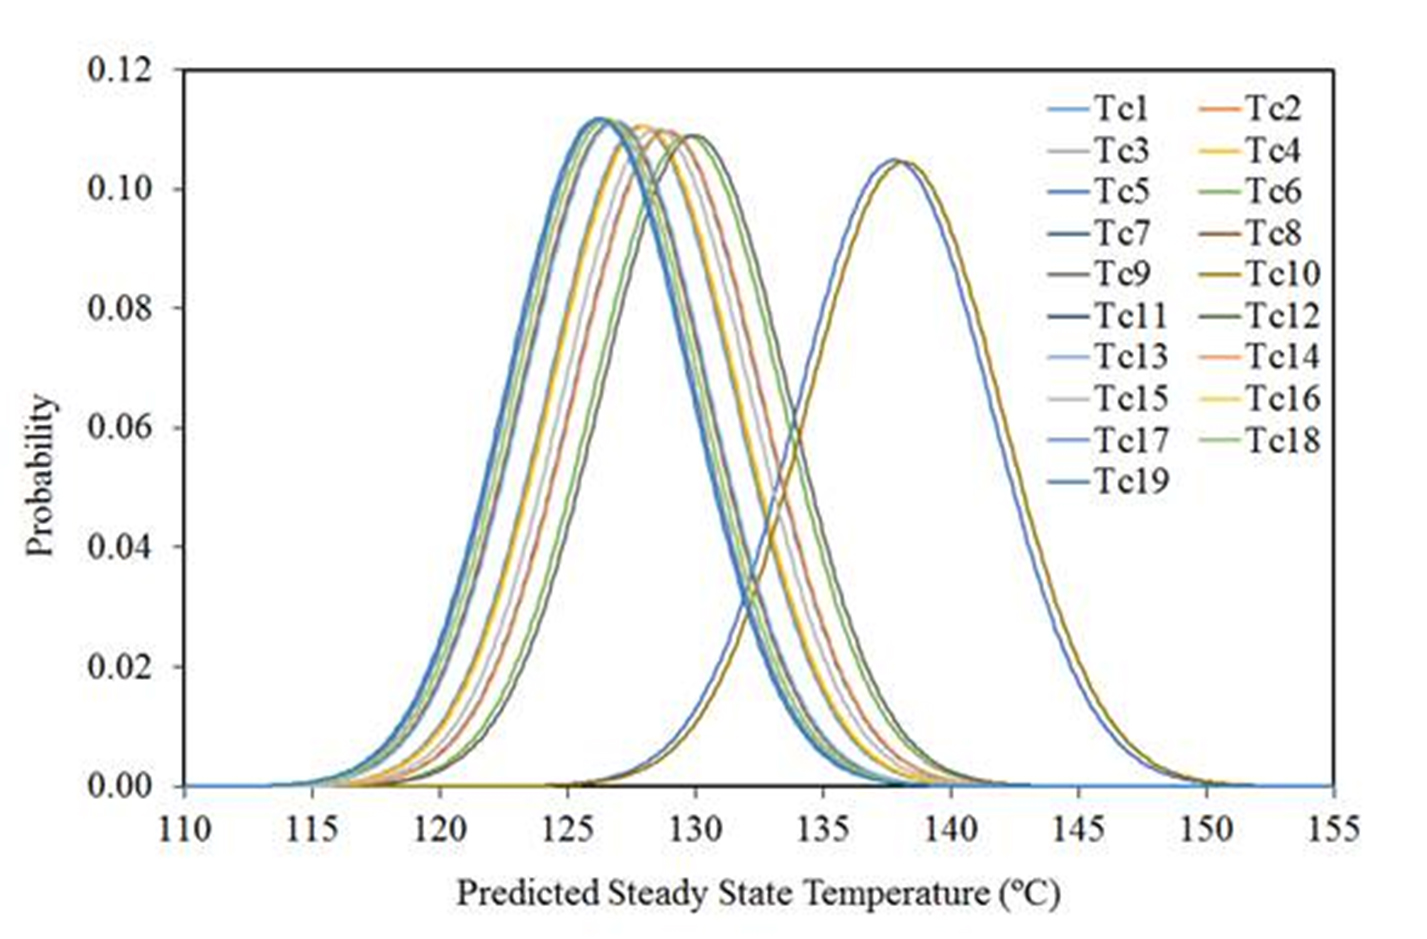 Sample steady-state temperature distributions resulting from a Monte Carlo analysis.